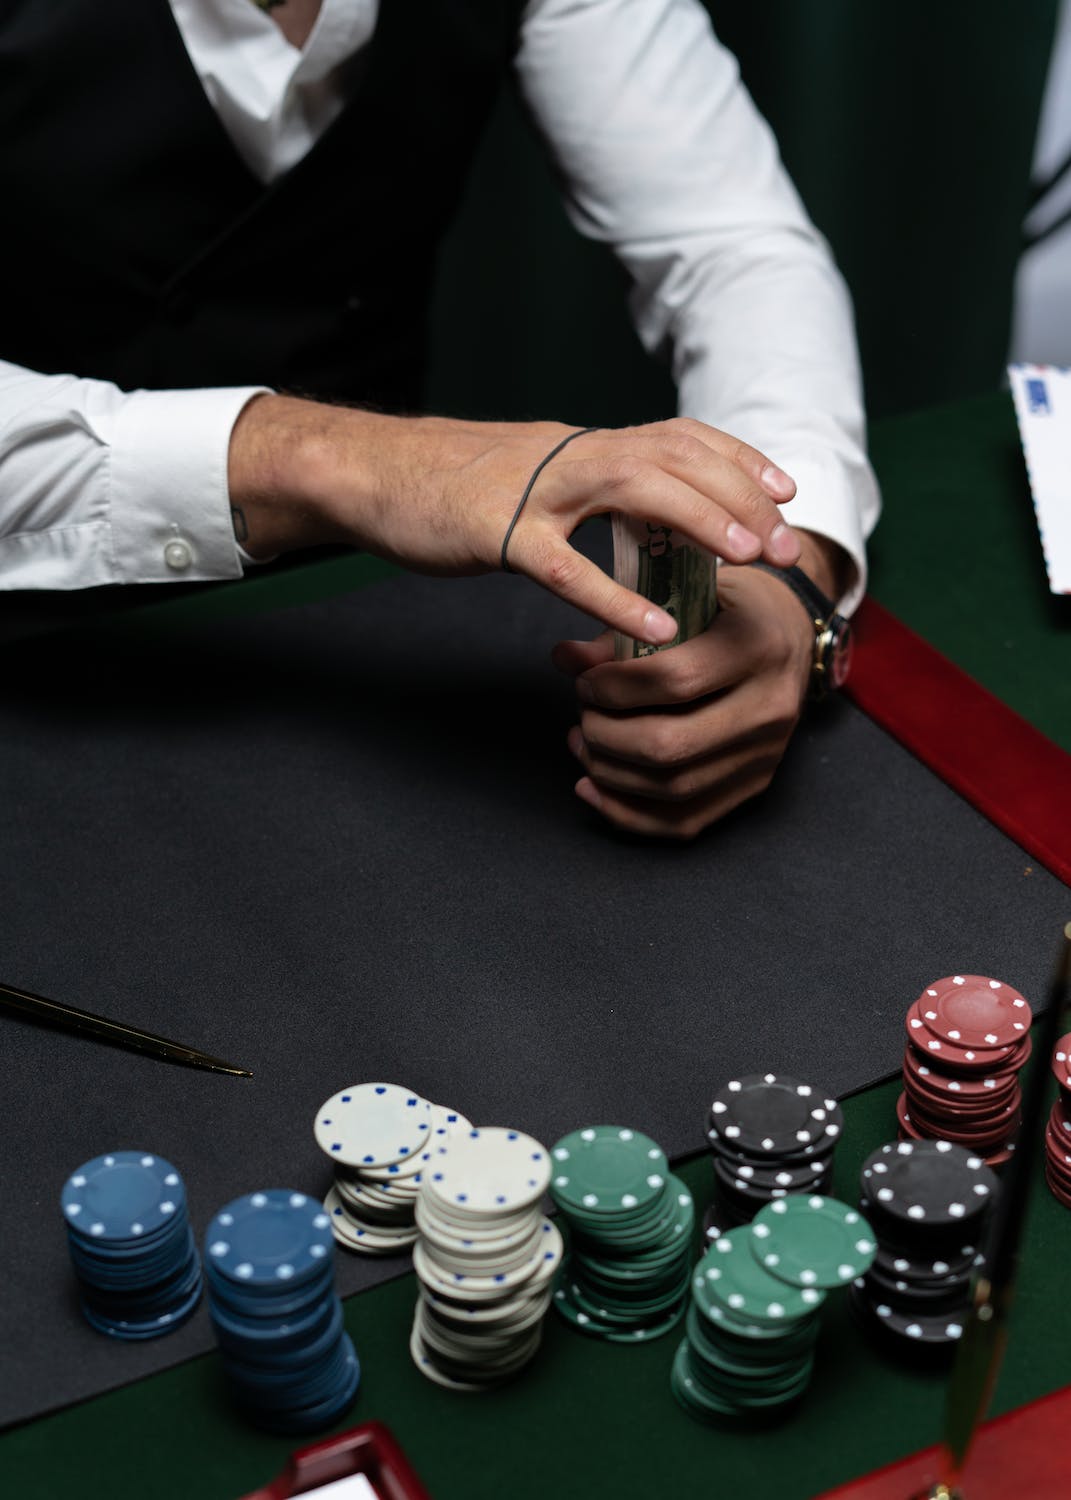 You are currently viewing Winning with Confidence: Developing a Champion’s Poker Player Mentality